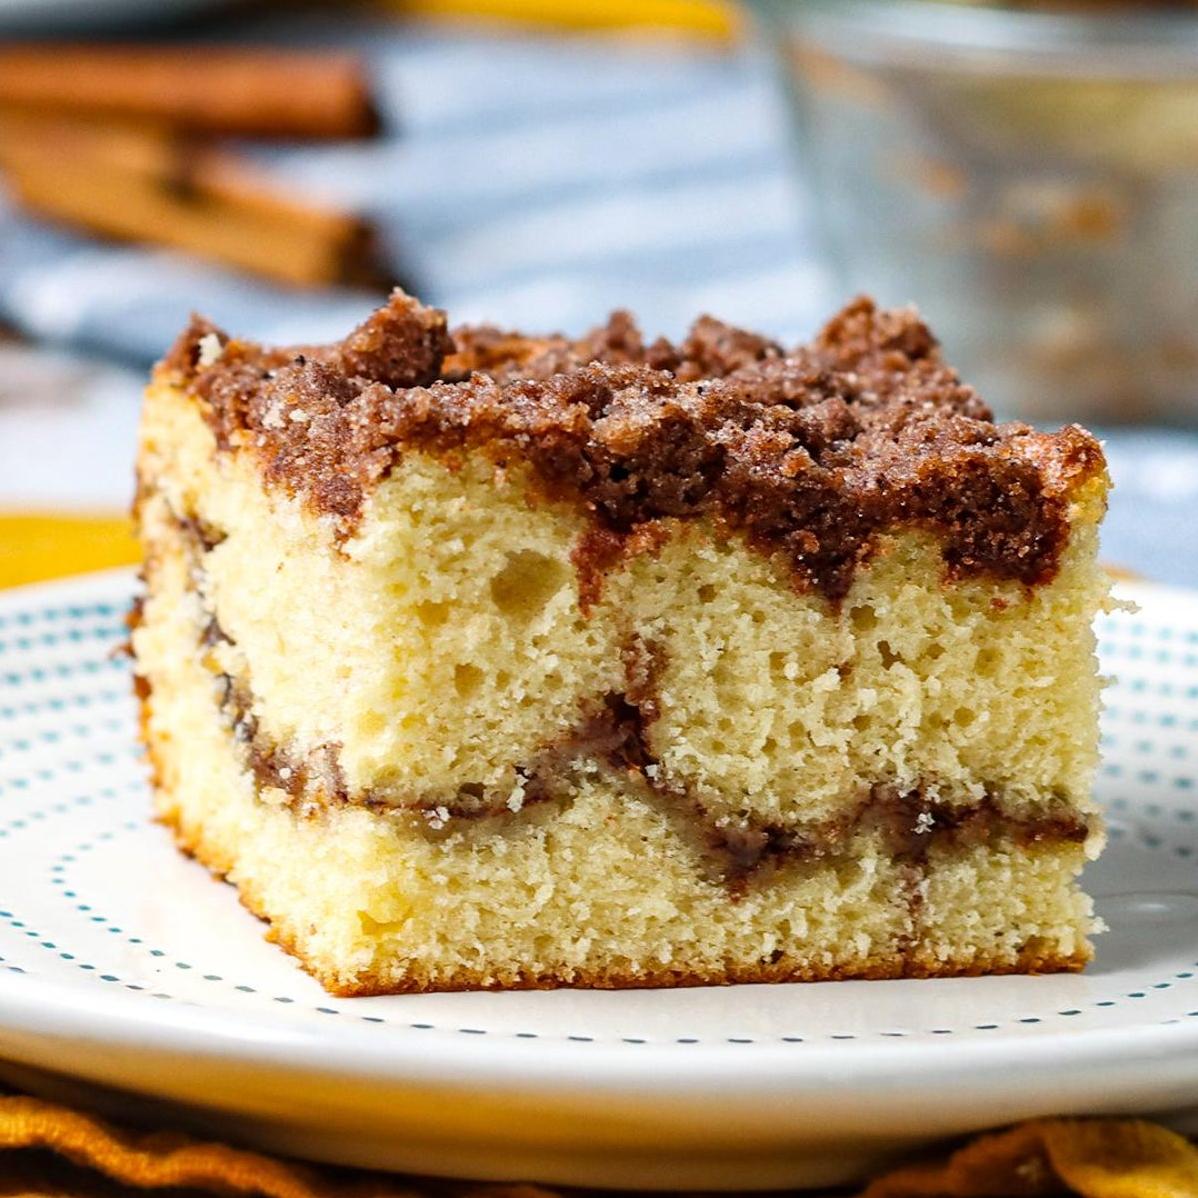  With a fluffy texture and a cinnamon swirl, this coffee cake is simply irresistible.